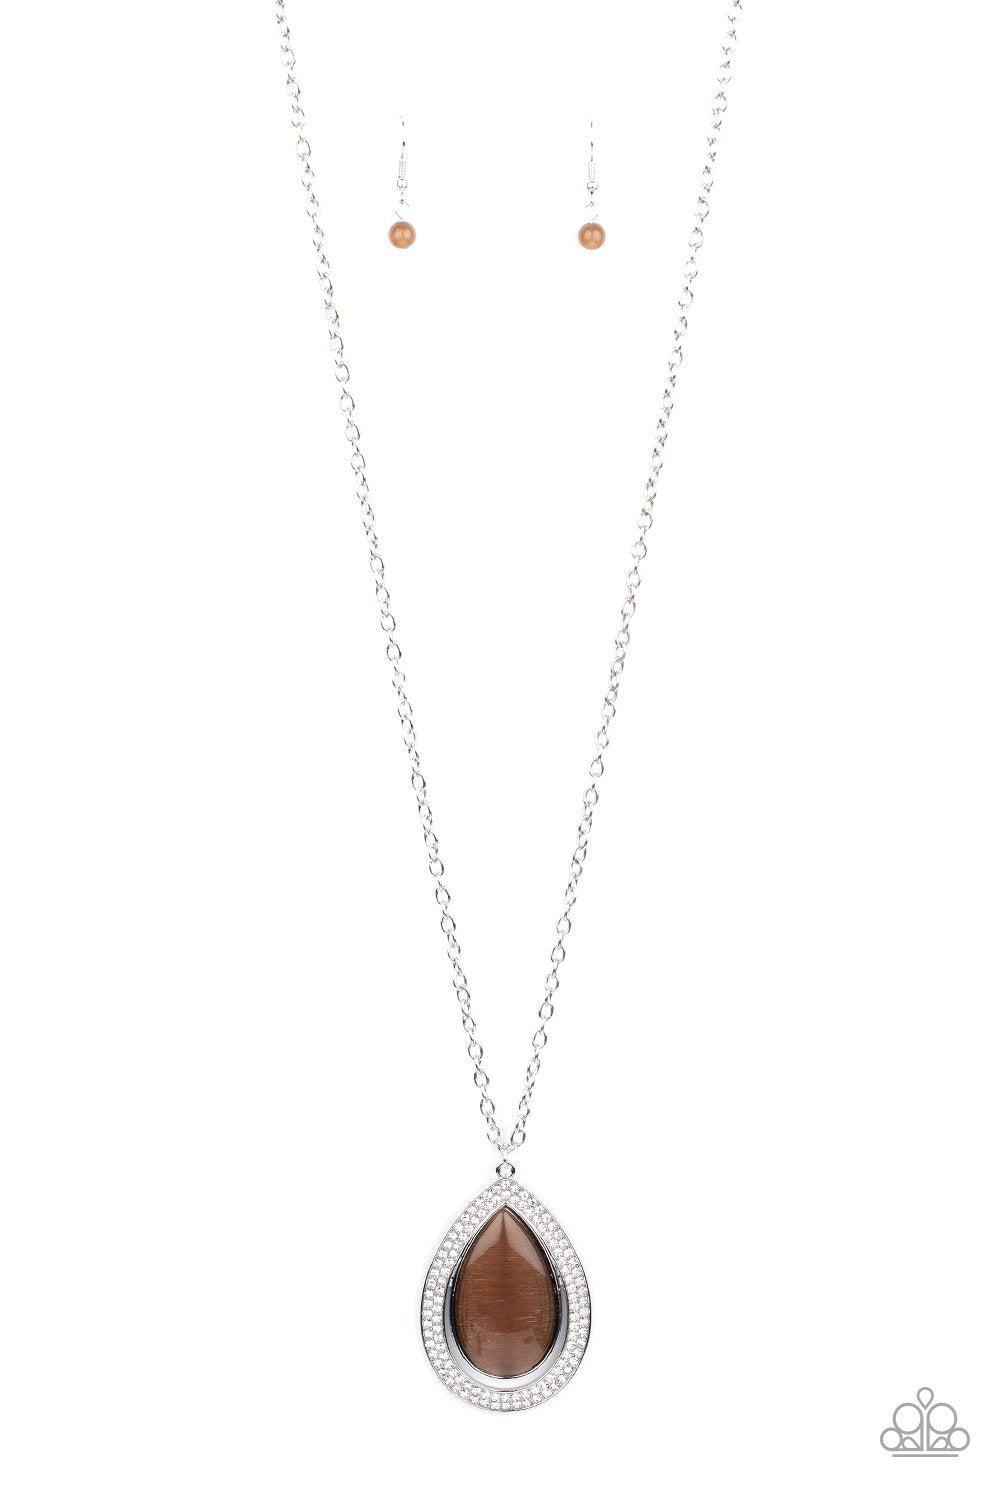 You Dropped This Brown Teardrop Cat's Eye Stone Necklace - Paparazzi Accessories-CarasShop.com - $5 Jewelry by Cara Jewels